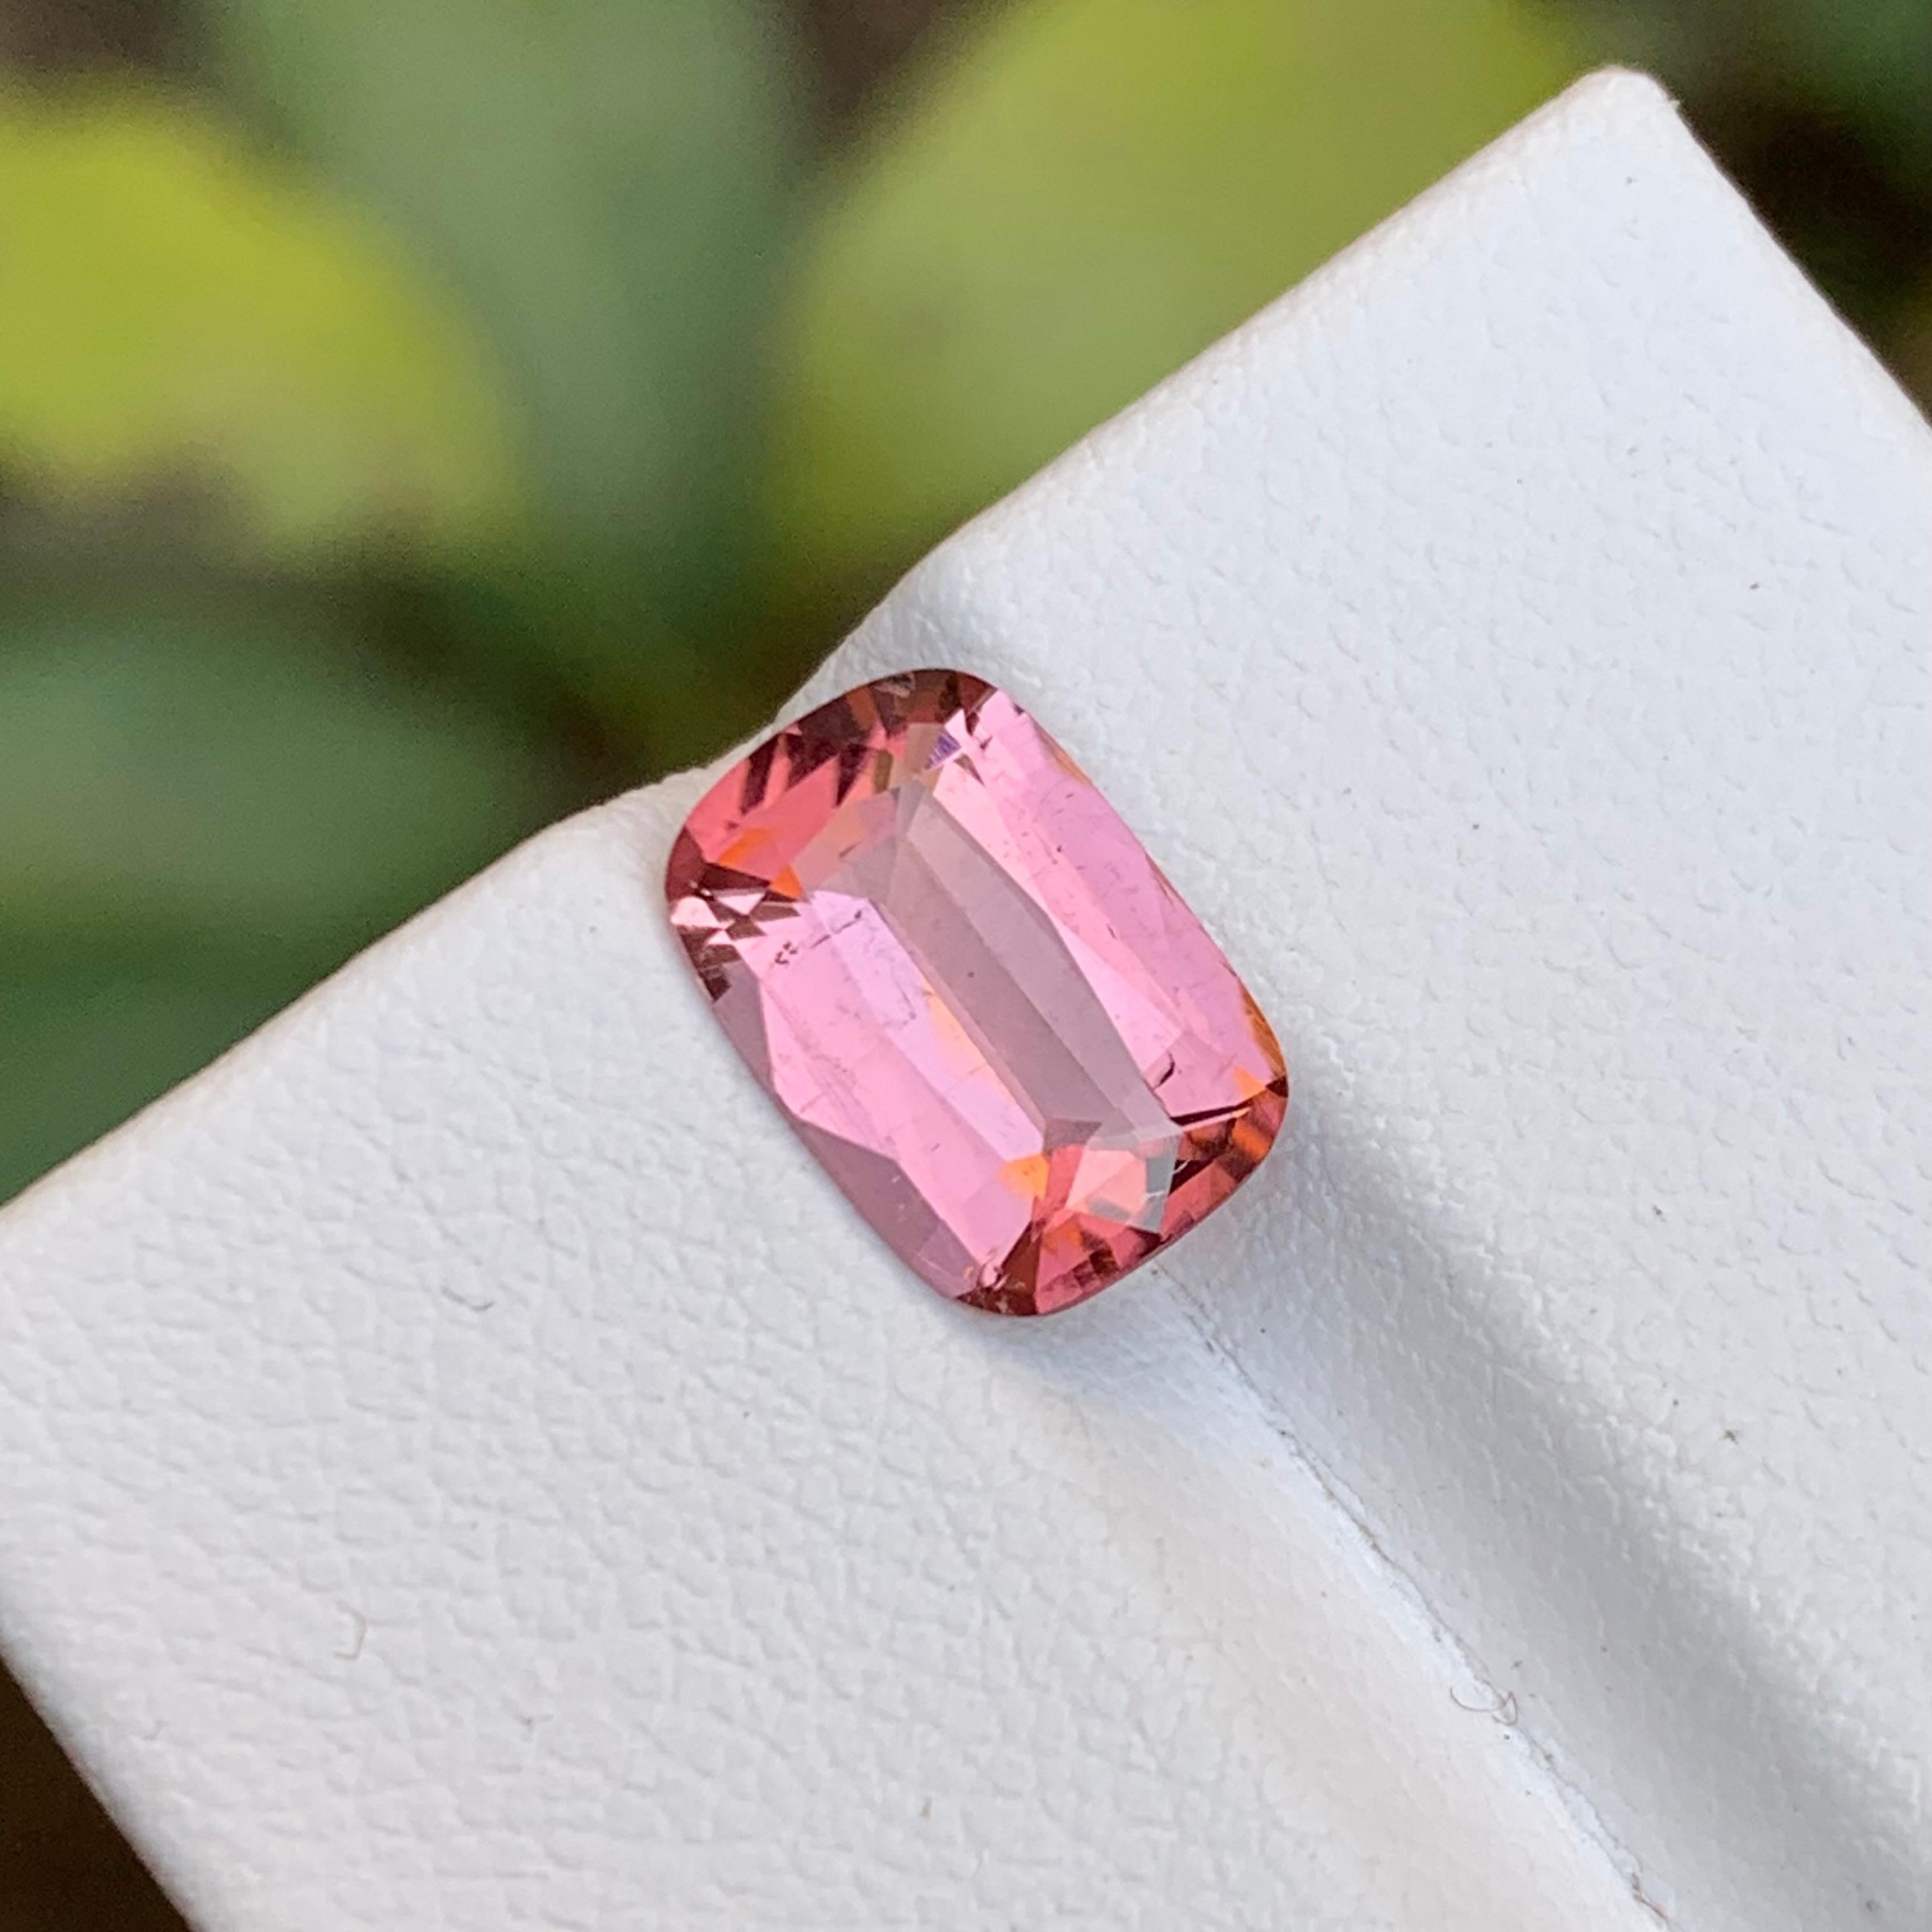 Rare Pink Natural Tourmaline Loose Gemstone, 2.30 Ct Cushion Cut Ideal for Ring For Sale 2